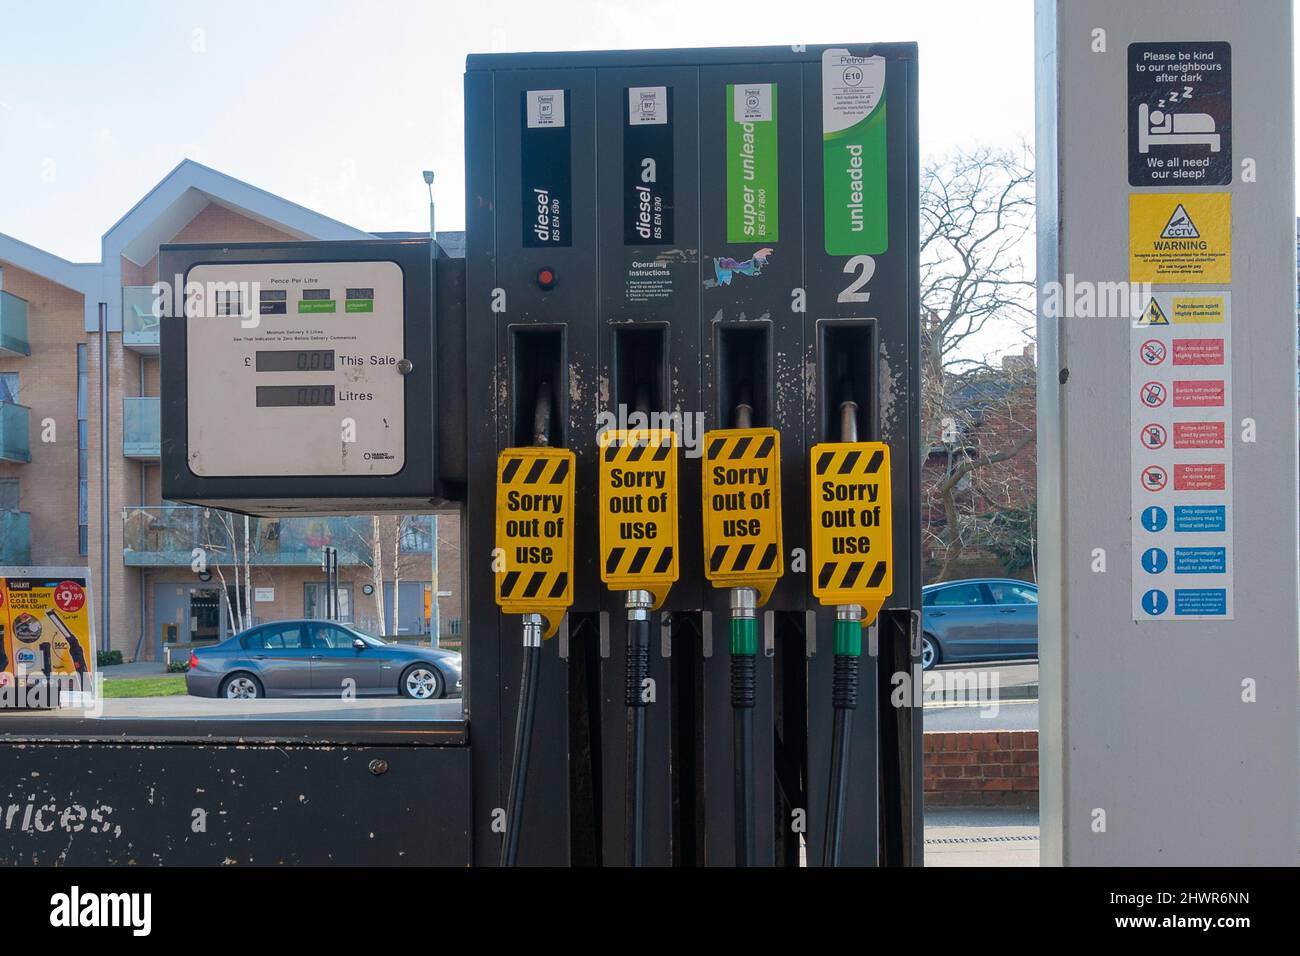 Ashford, Kent, UK. 7th Mar, 2022. A petrol station in Ashford, Kent is now charging over £1.67 per litre of diesel as a barrel of oil hits $130. This petrol station has short supply of fuel. Photo Credit: Paul Lawrenson-PAL News/Alamy Live News Stock Photo